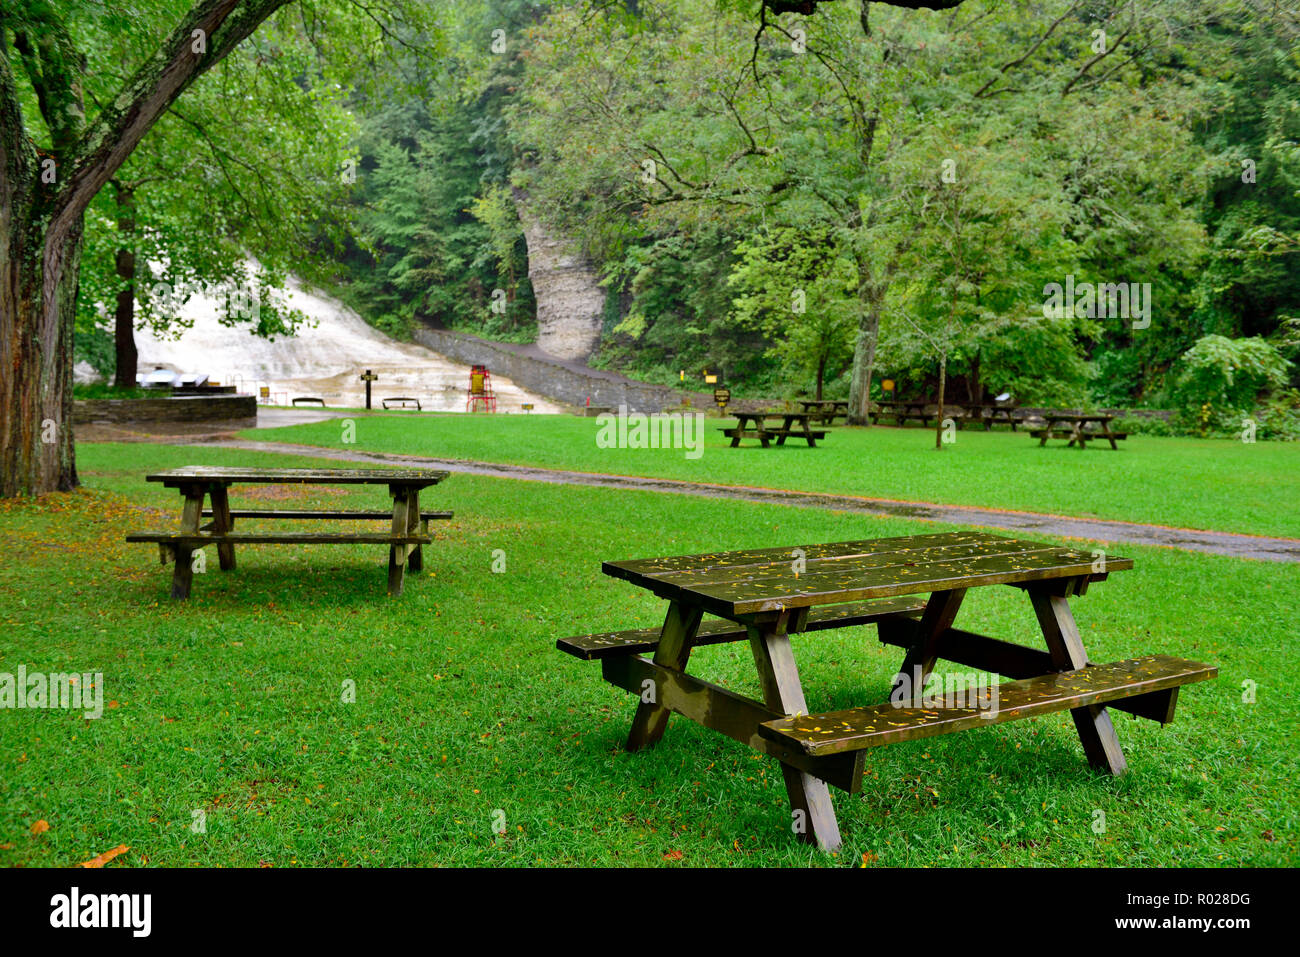 Public park with picnic tables amongst trees by Buttermilk Falls in Buttermilk State Park near Ithaca NY, USA Stock Photo